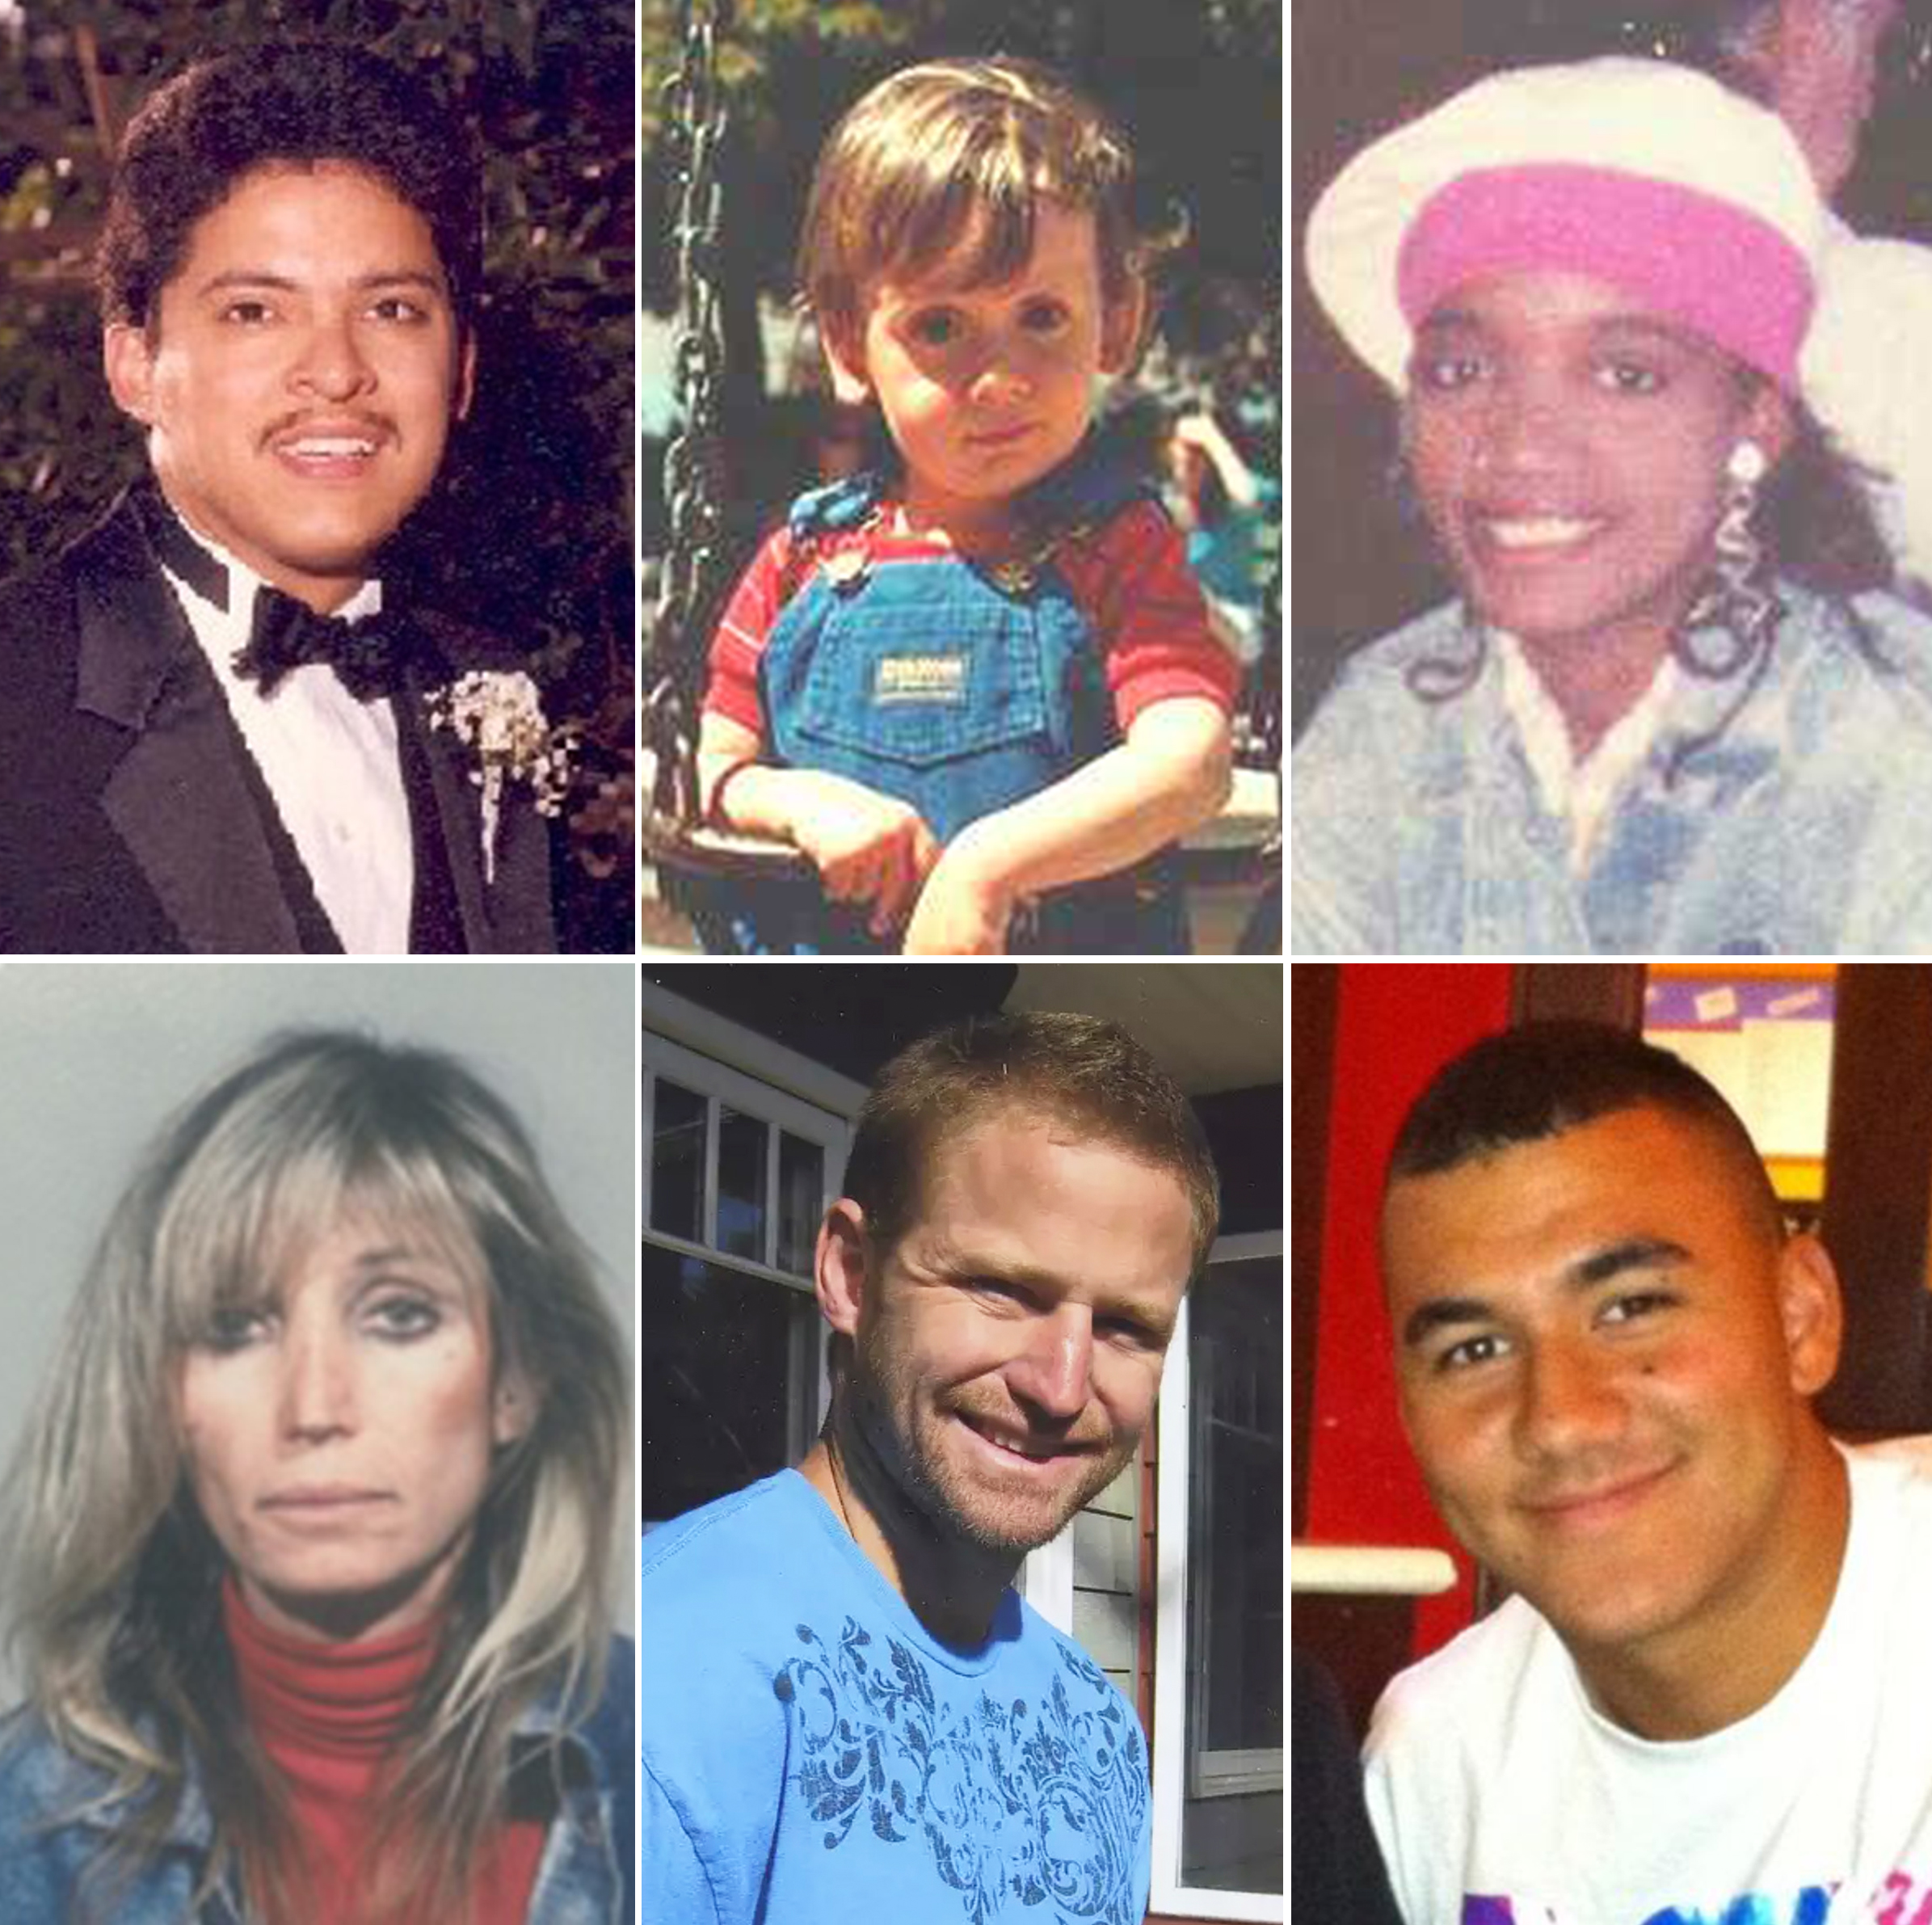 Six varied photos of people: a formal dressed man, a child in overalls, a woman in a visor, a woman with a turtleneck, a smiling man in blue, and a grinning young man.